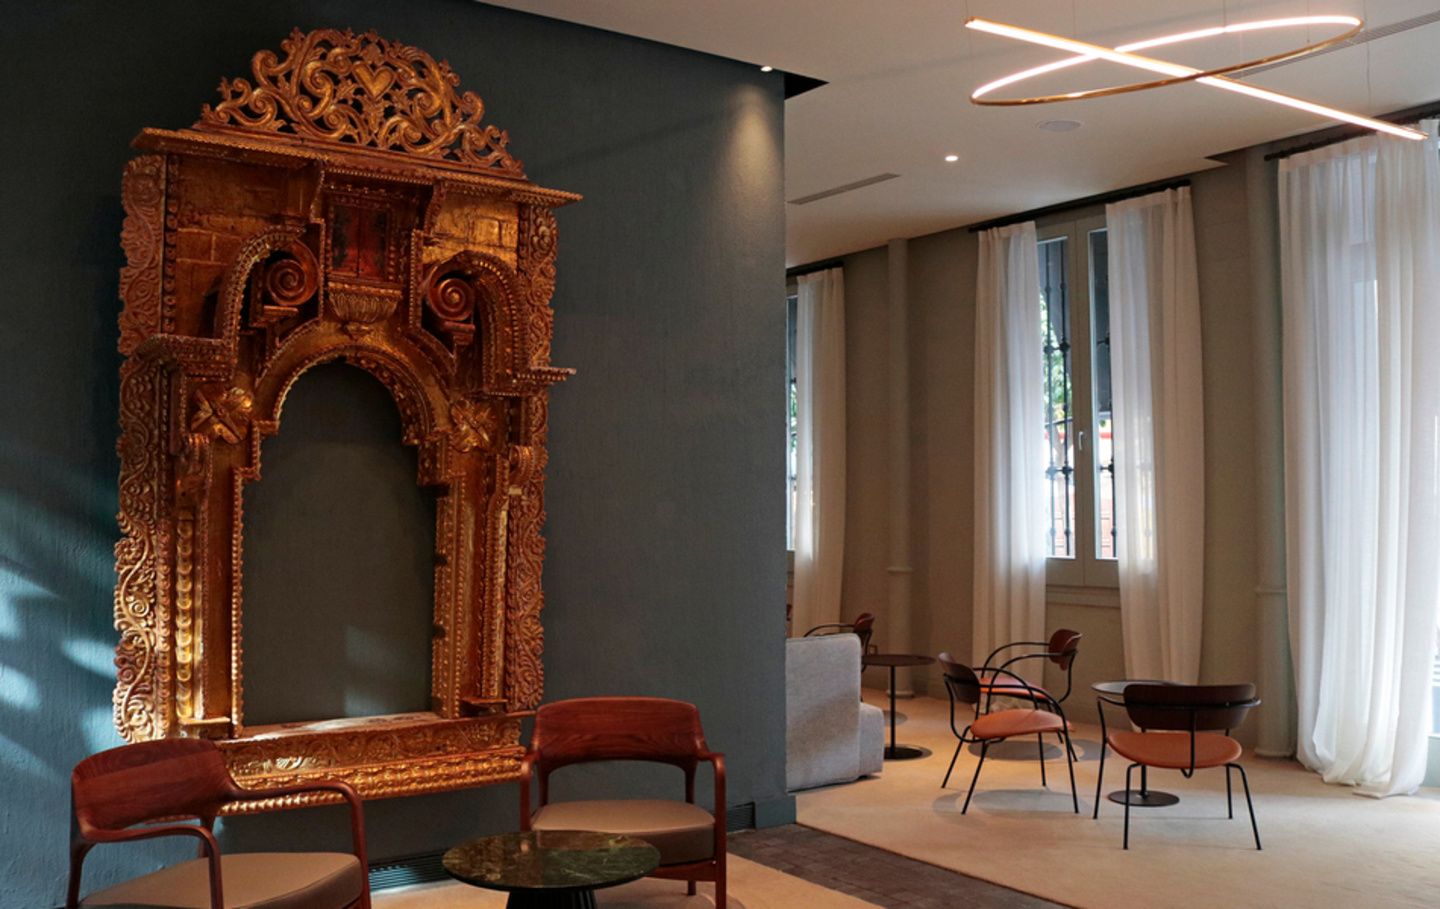 EME Catedral Mercer Hotel: History and Modernity